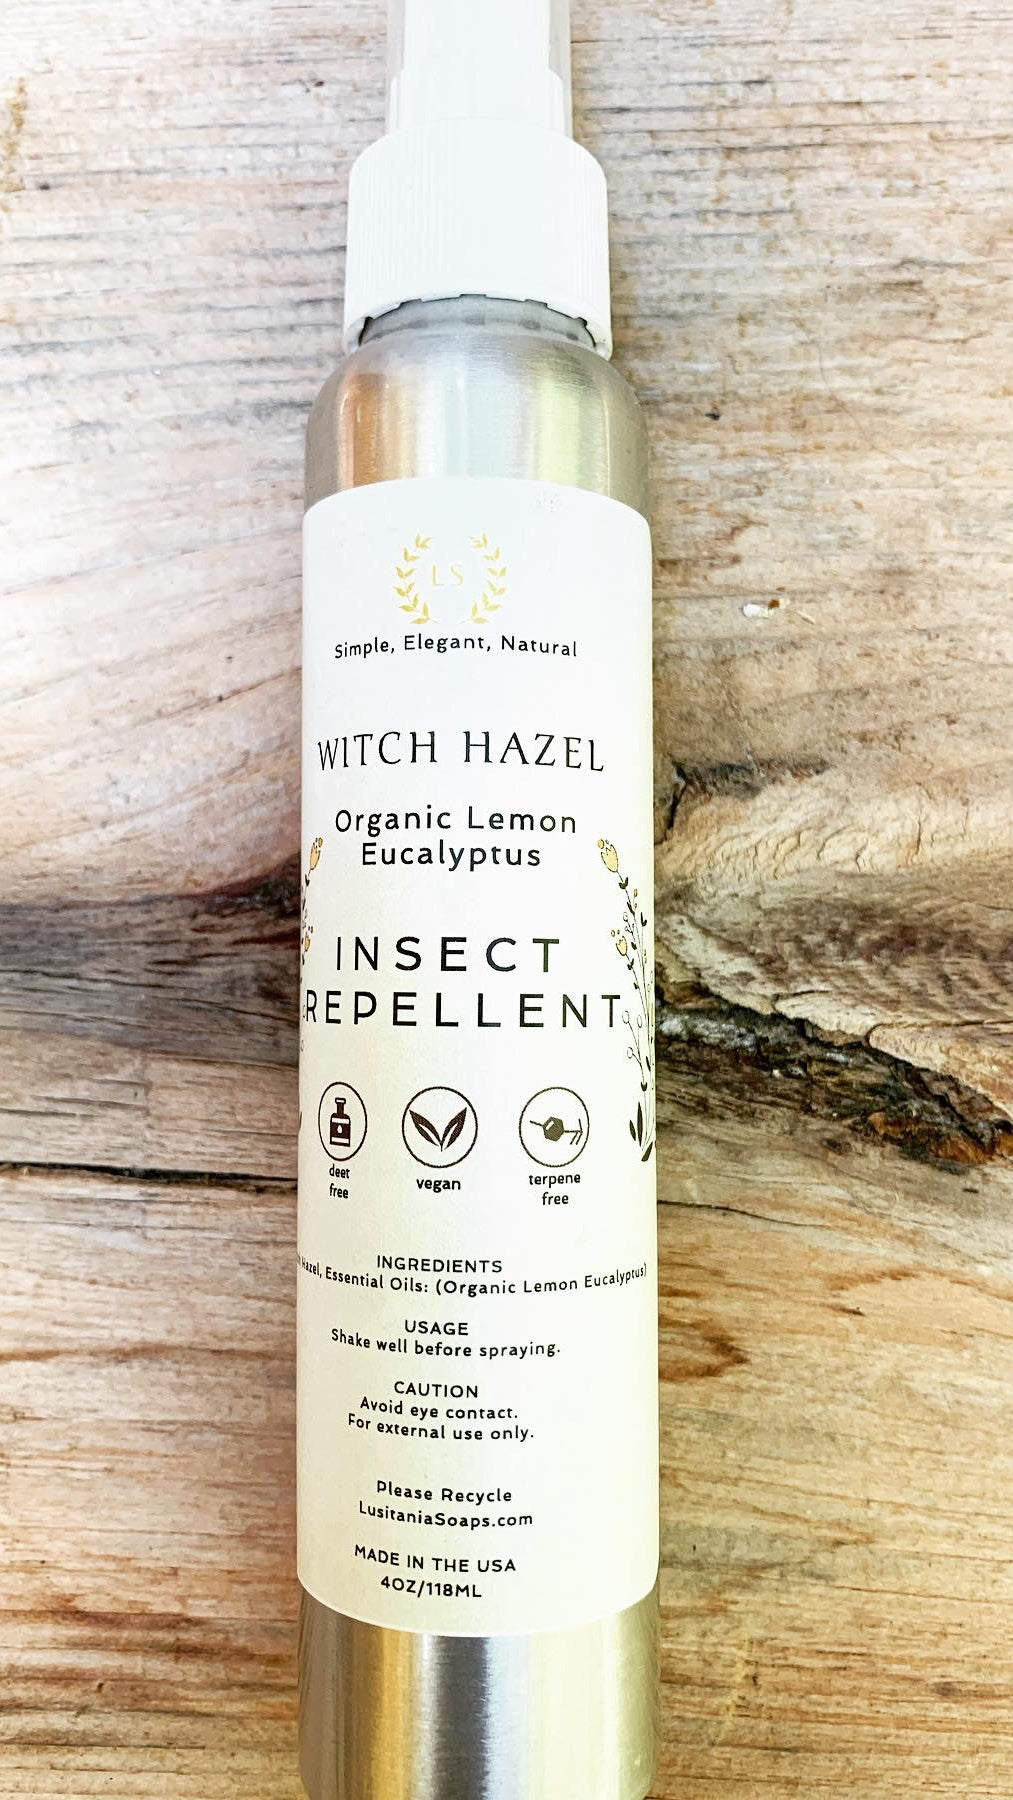 Natural Bug Spray - Outdoor Spray | DEET free Insect Repellent | Witch Hazel & Essential Oils | Repels Mosquitoes, Ticks, Gnats